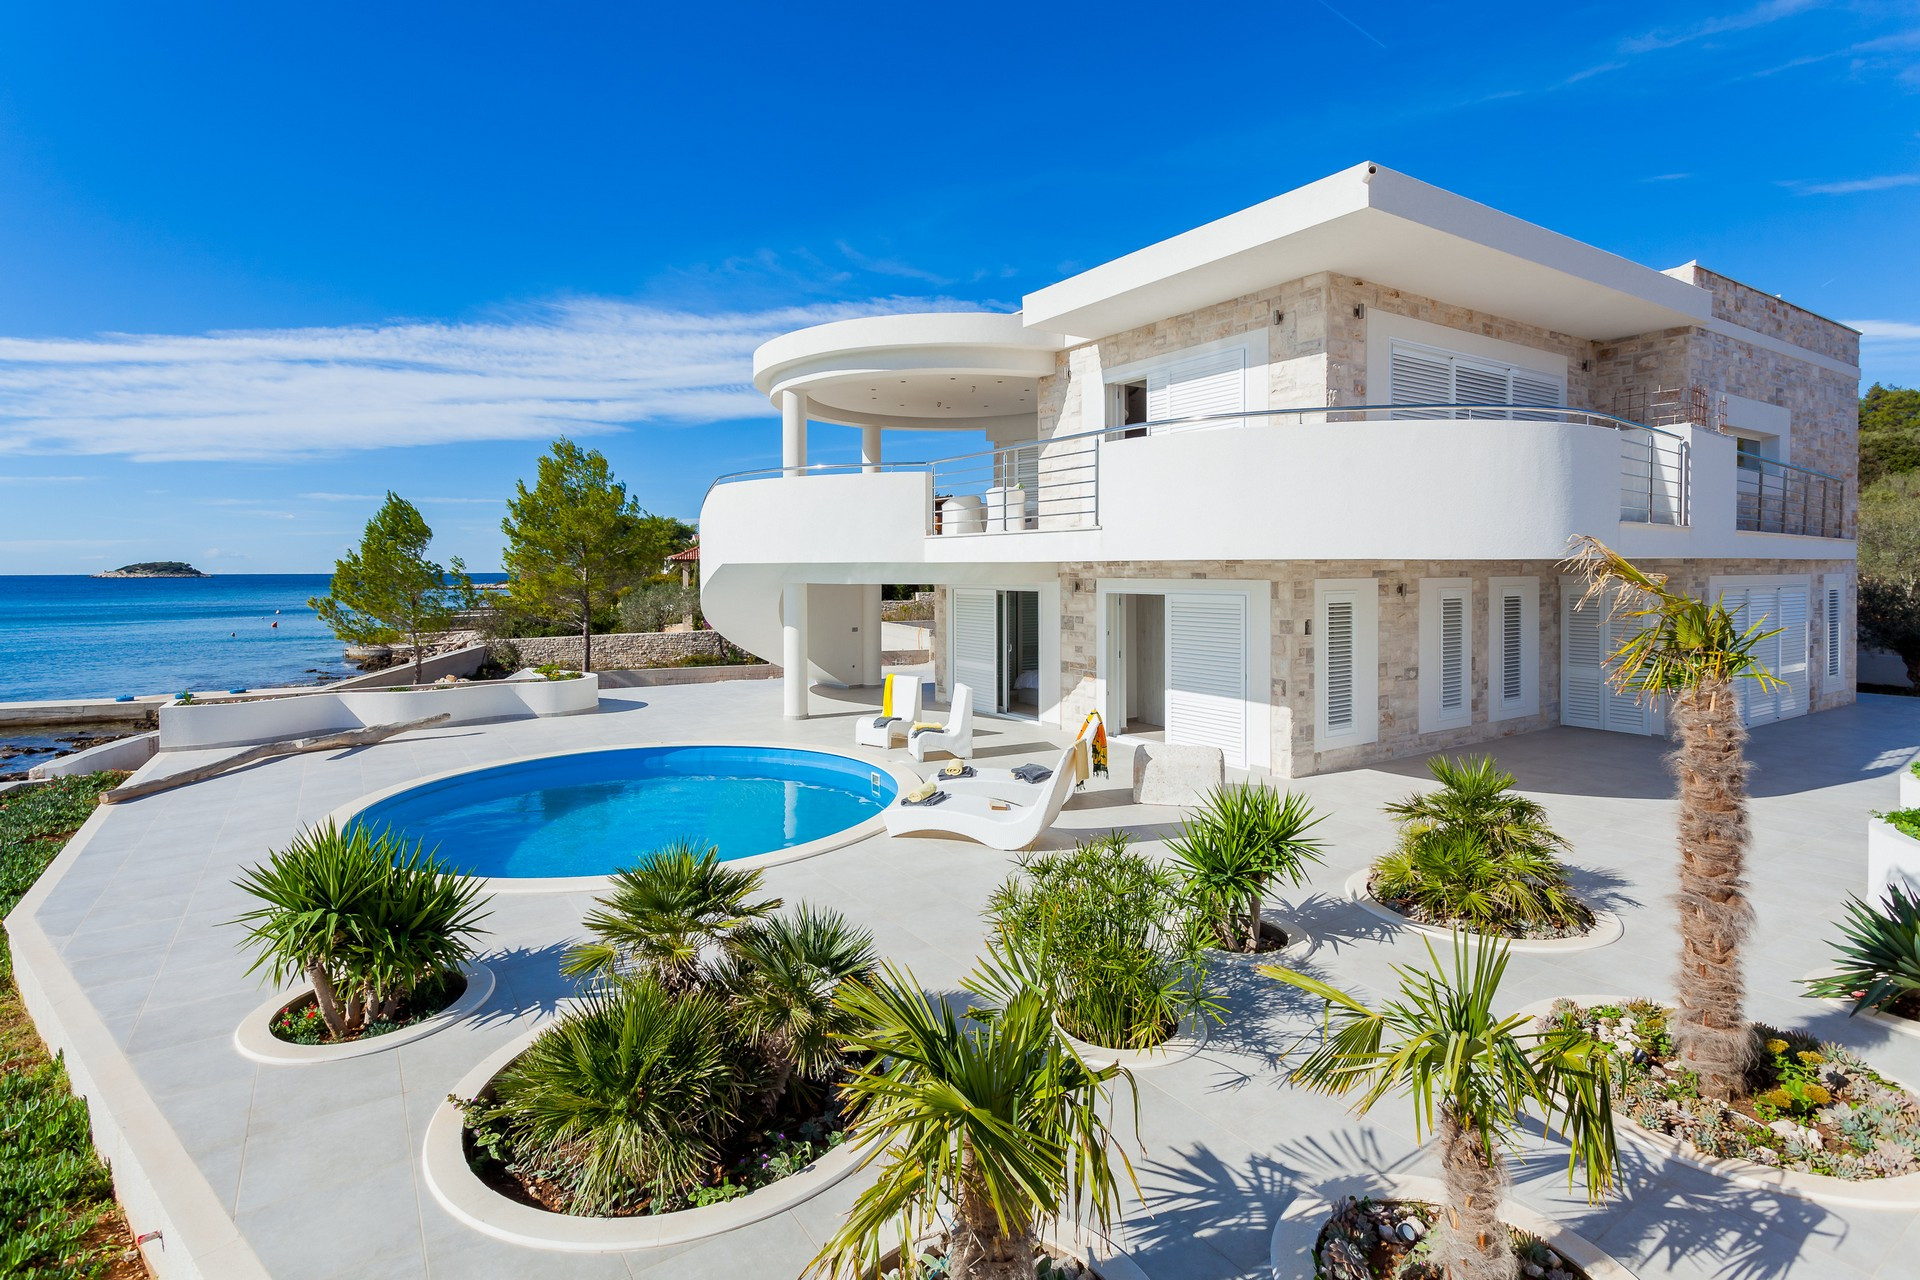 The Benefits of Living In A Villa Community